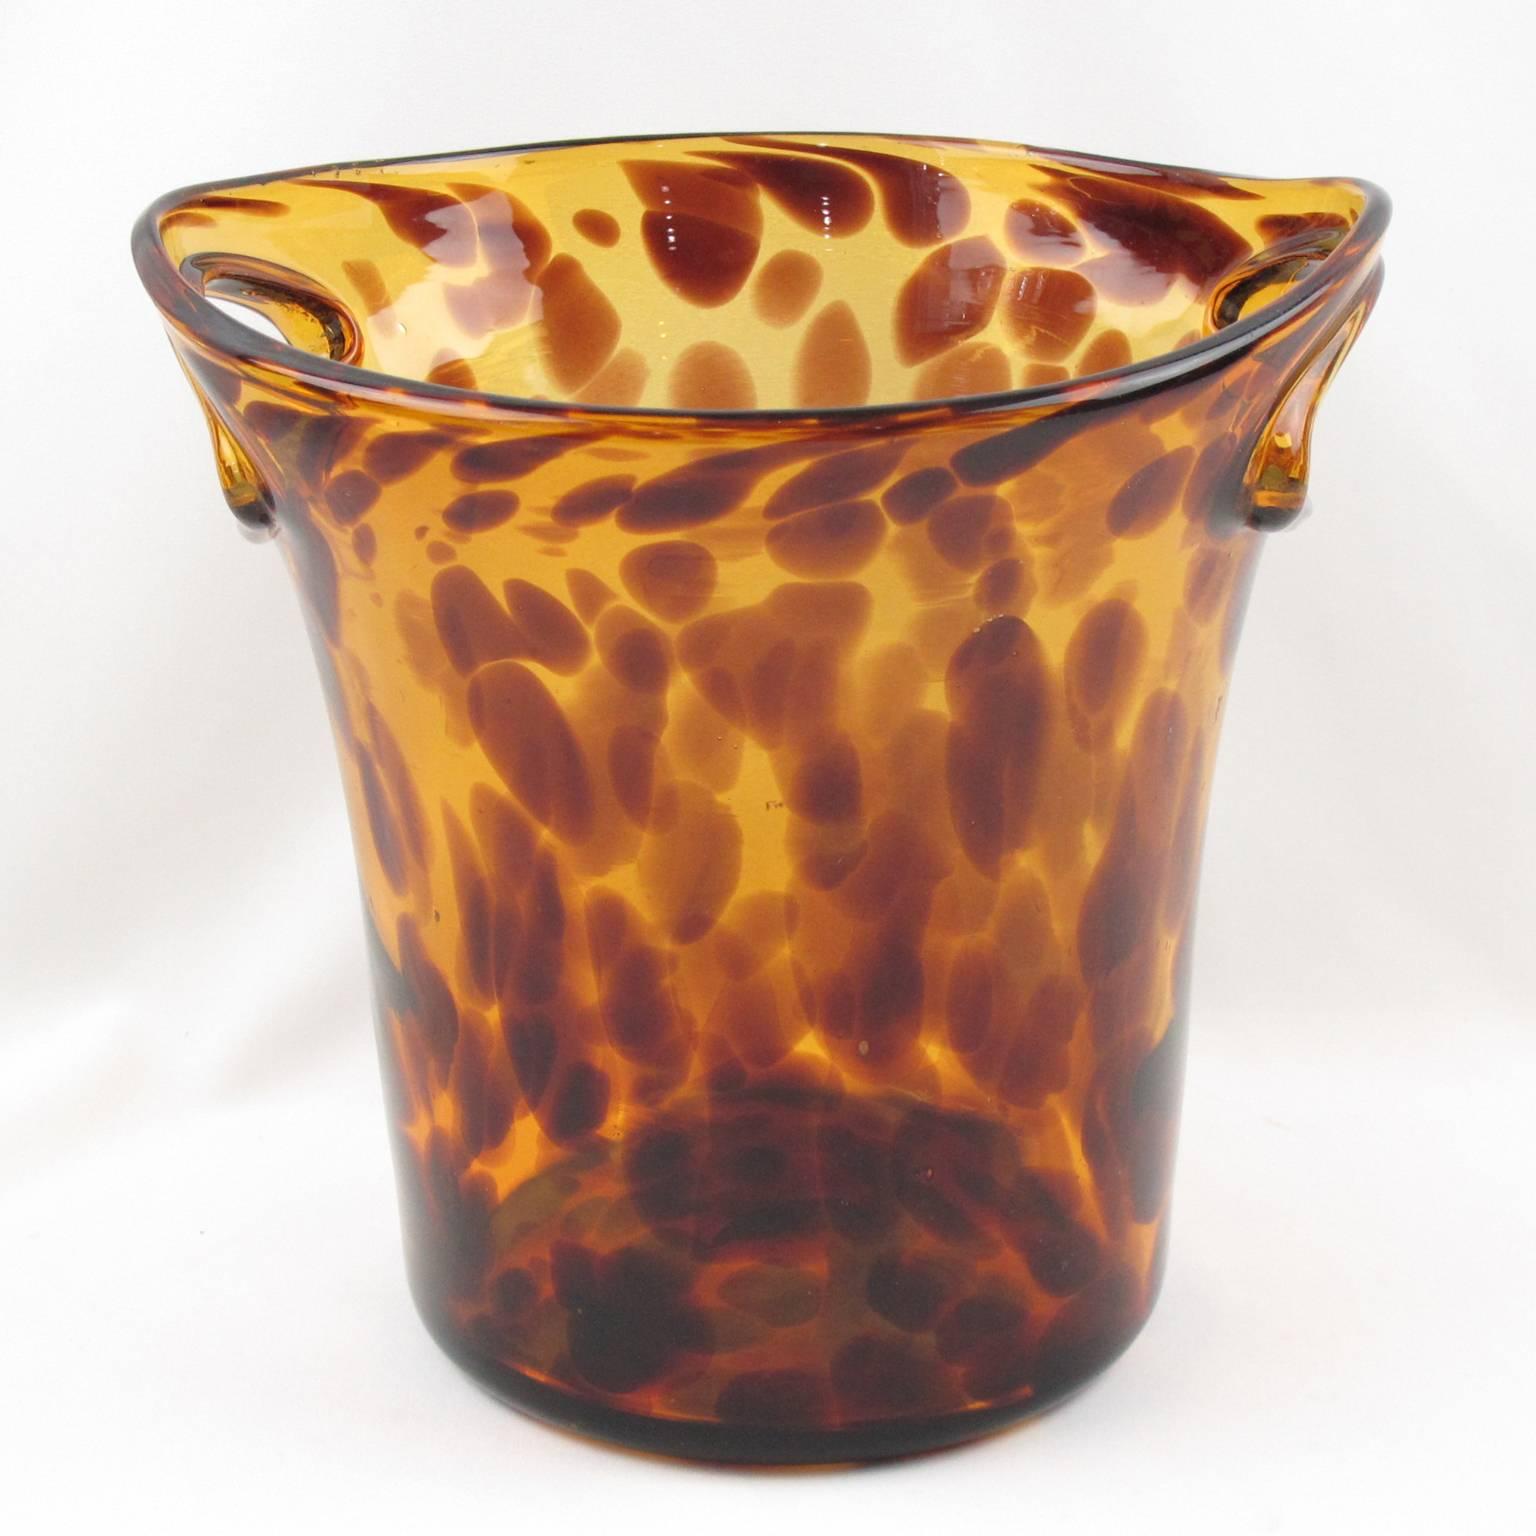 1960s French designer Christian Dior glass champagne cooler or wine cooler or ice bucket. From the Dior Home collection, mouth-blown in Empoli, Italy. Exclusive tortoise shell color flowing pattern. Polished pontil mark on the bottom. 
Measurements: